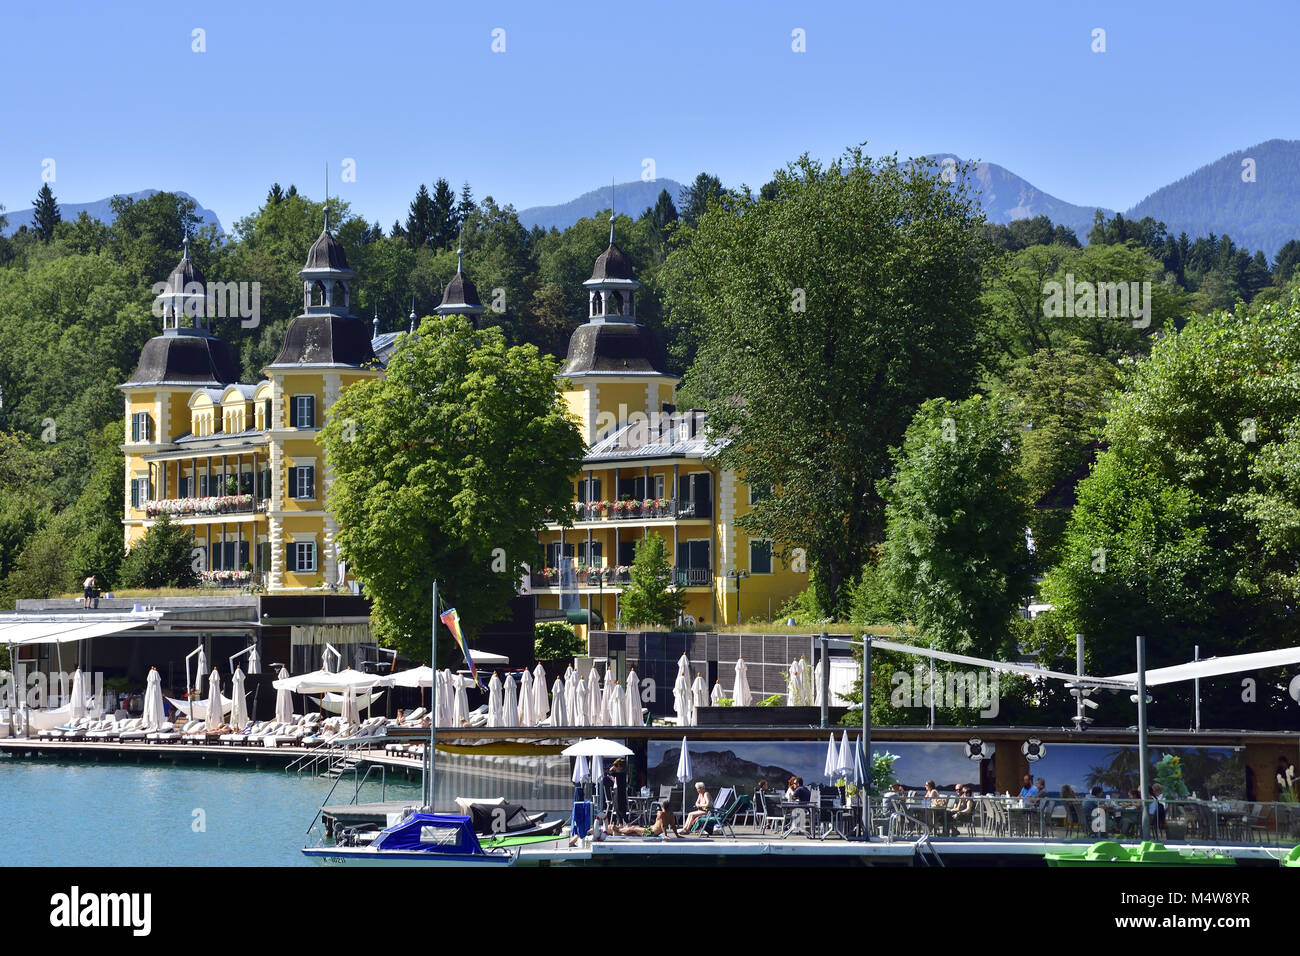 Hotel castle in Velden at Worthersee Stock Photo